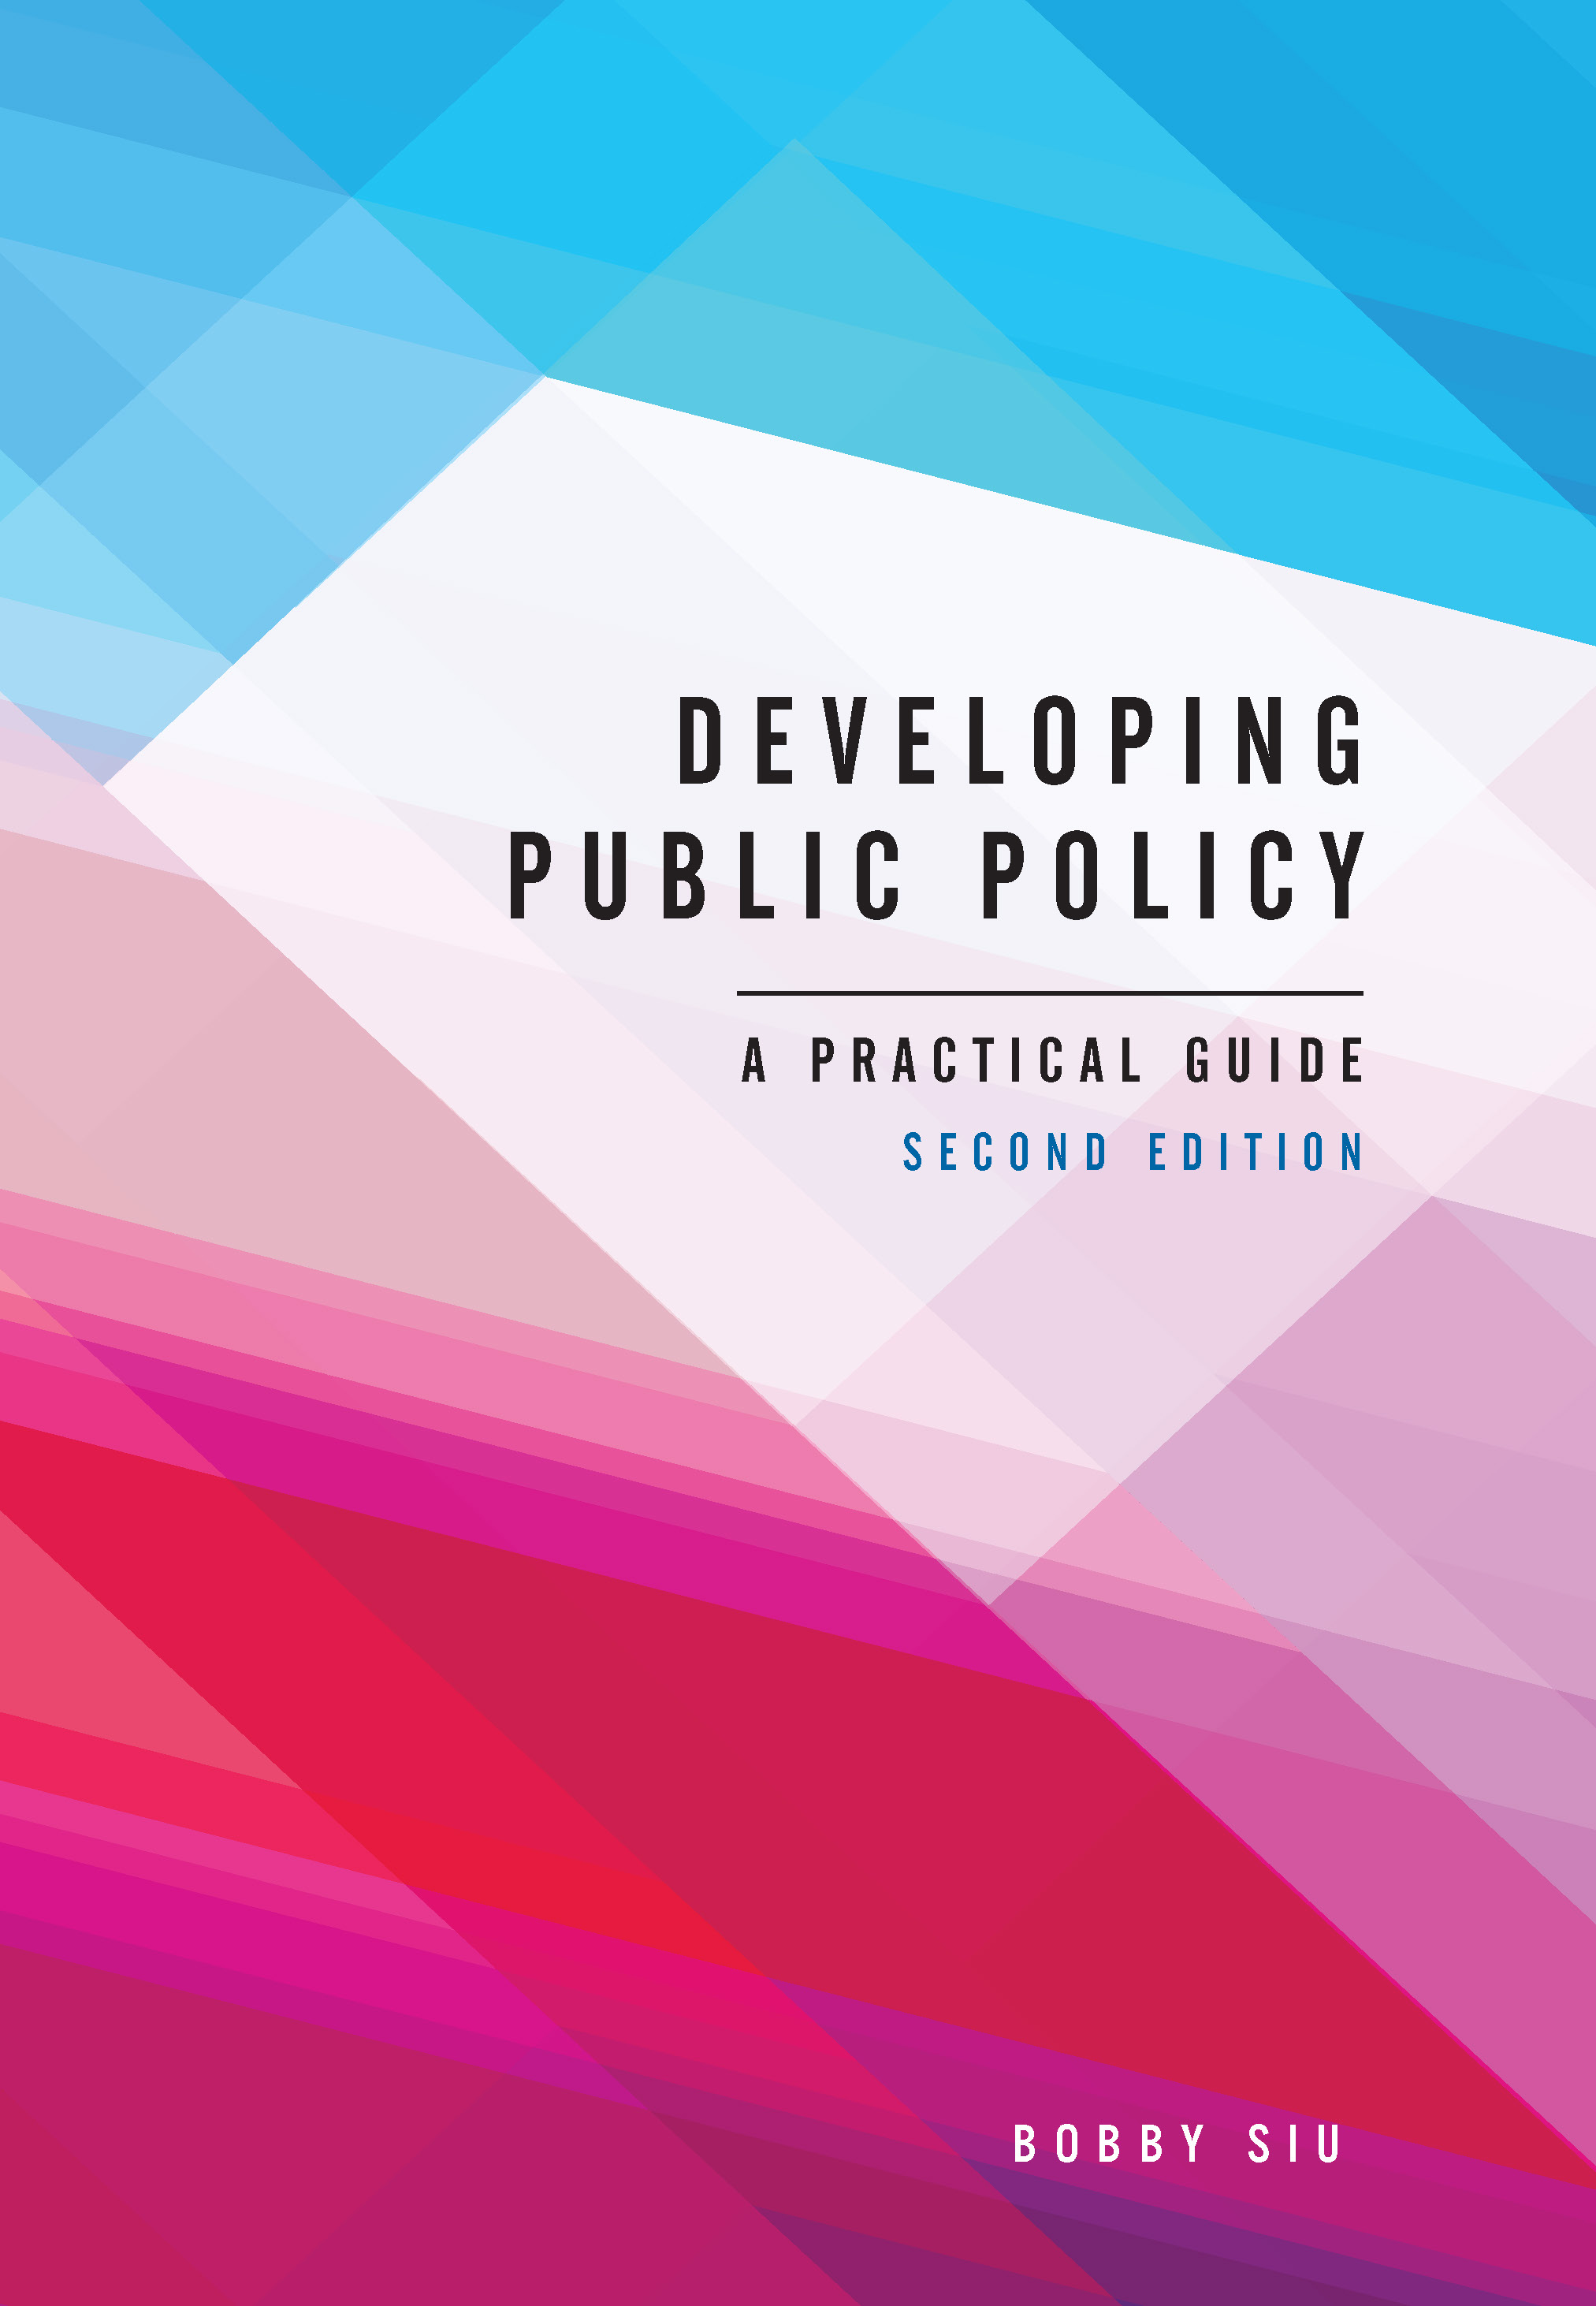 Developing Public Policy, Second Edition